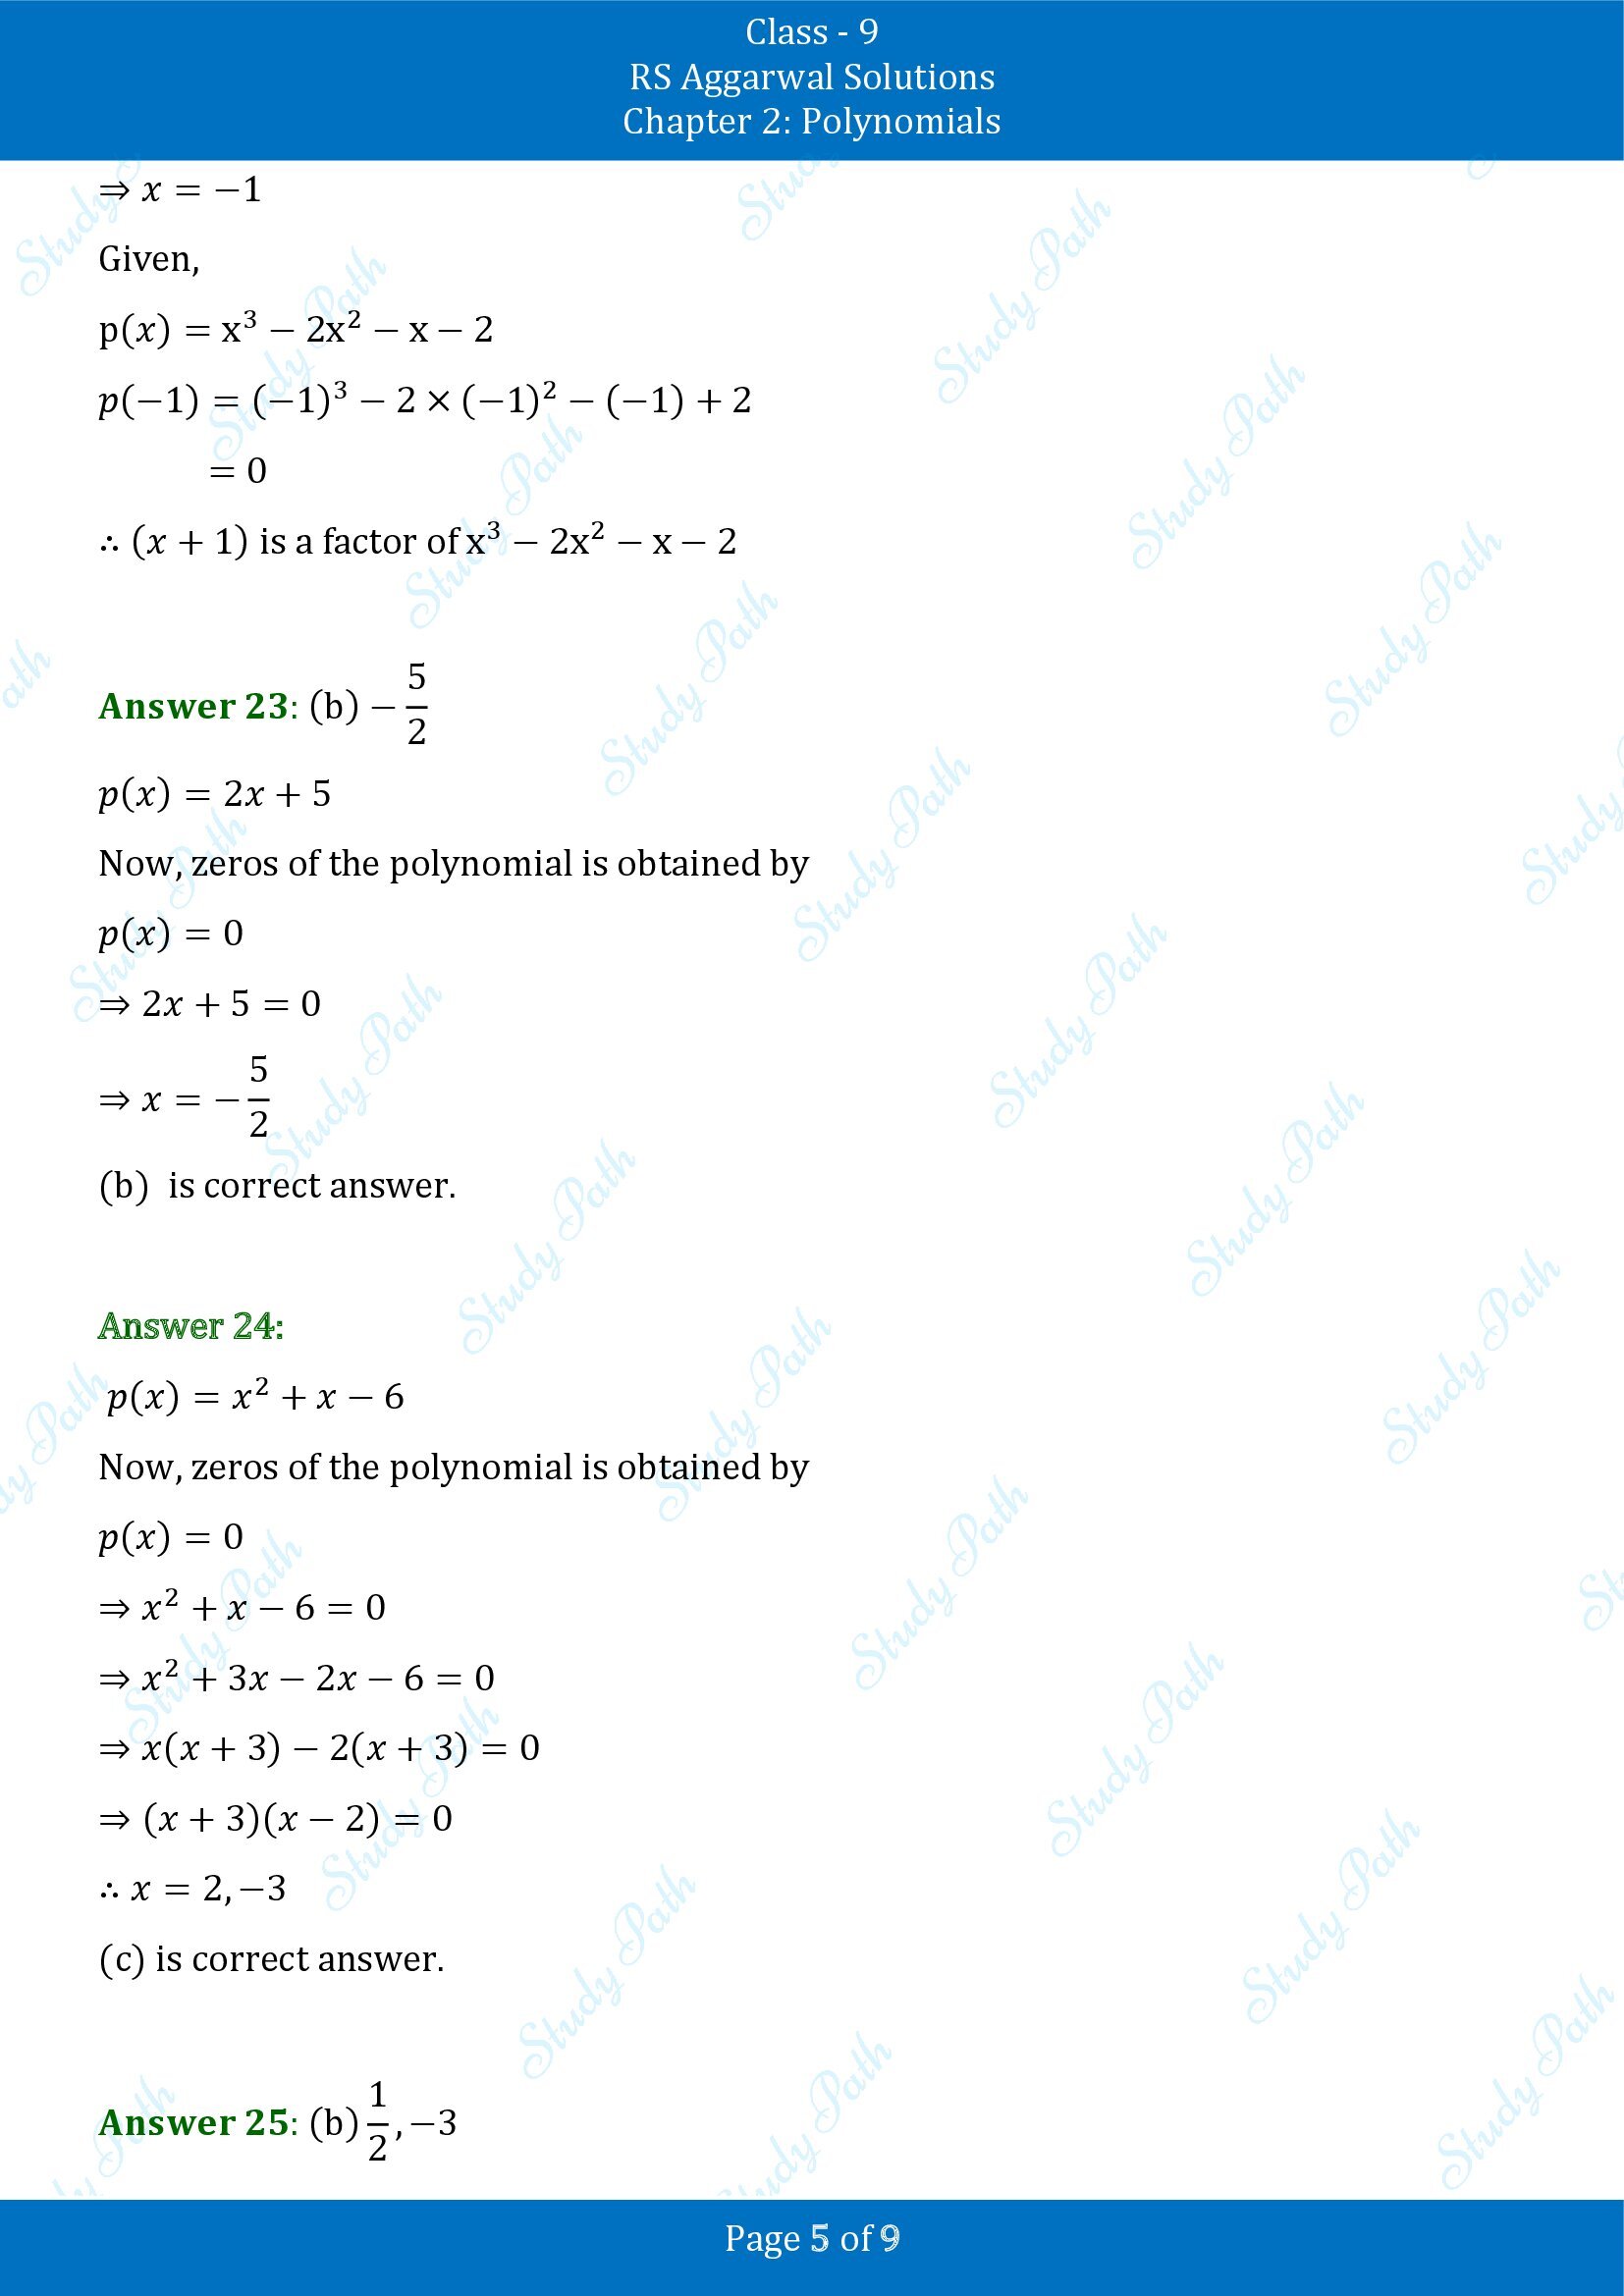 RS Aggarwal Solutions Class 9 Chapter 2 Polynomials Multiple Choice Questions MCQs 00005